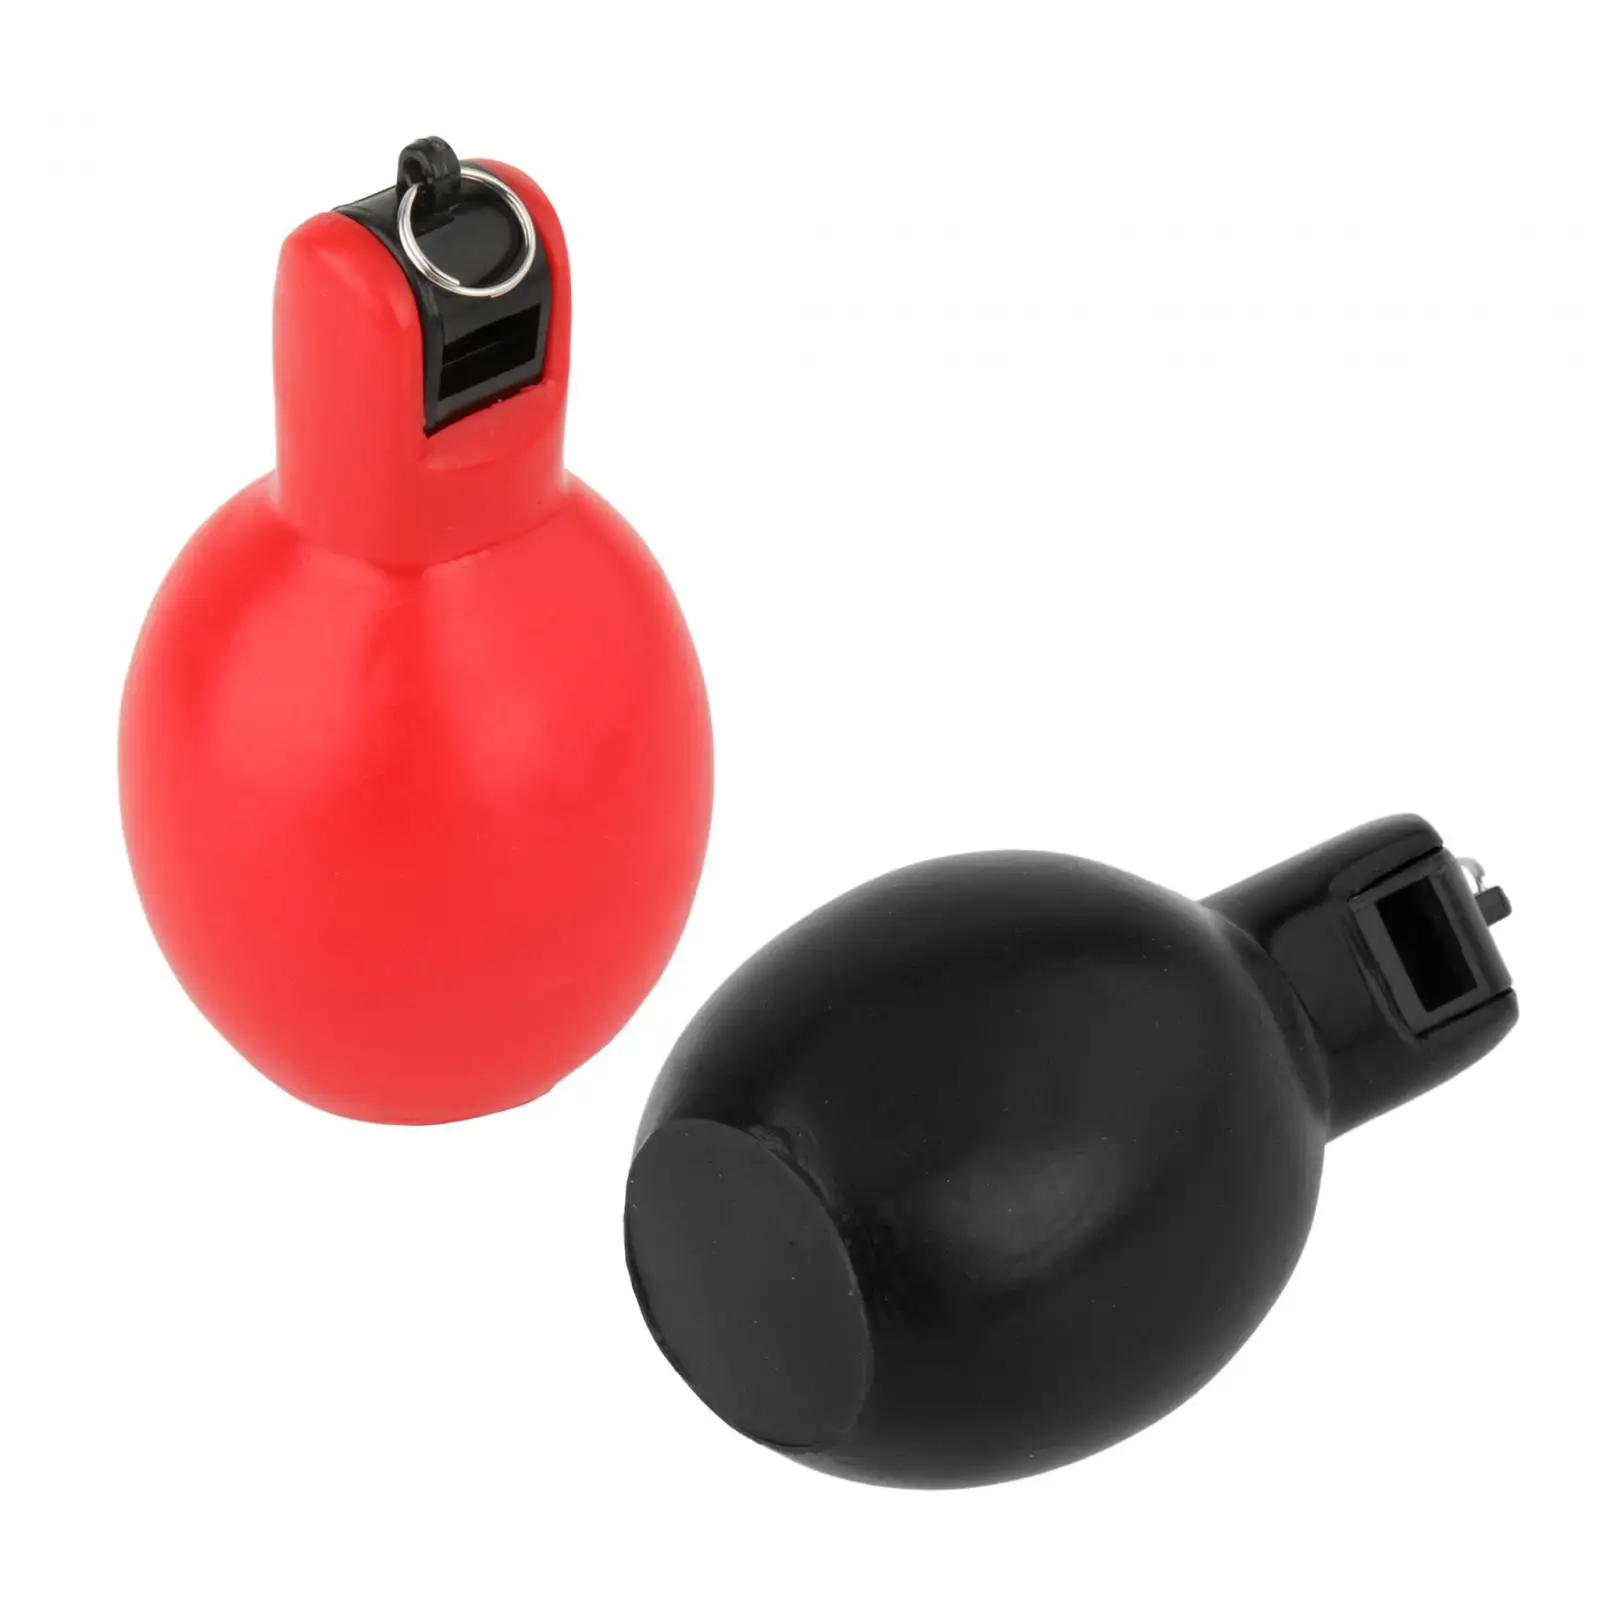 2 Pieces Hand Squeeze Whistles Manual Lightweight Loud Sound Coaches Whistle for Camping Training Hiking Survival Trekking